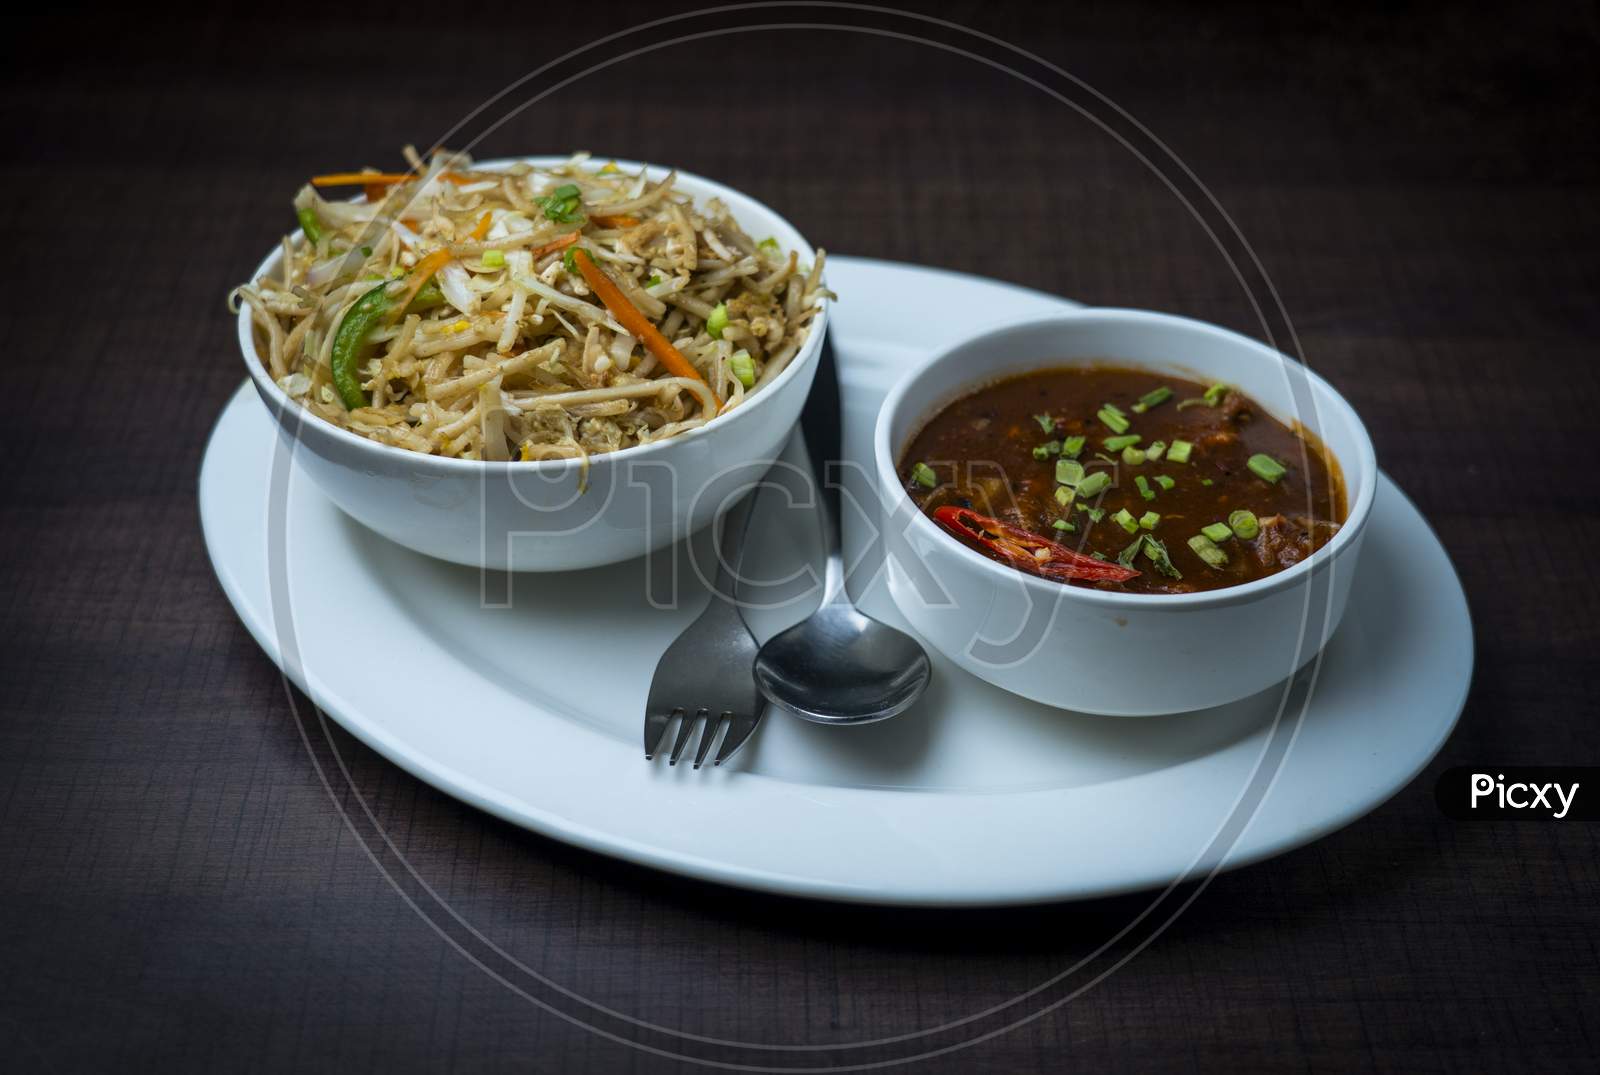 Chinese noodles with chicken, chicken manchurian garnished with spring onions. Prepared and served in a white plate.  wood texture in the background